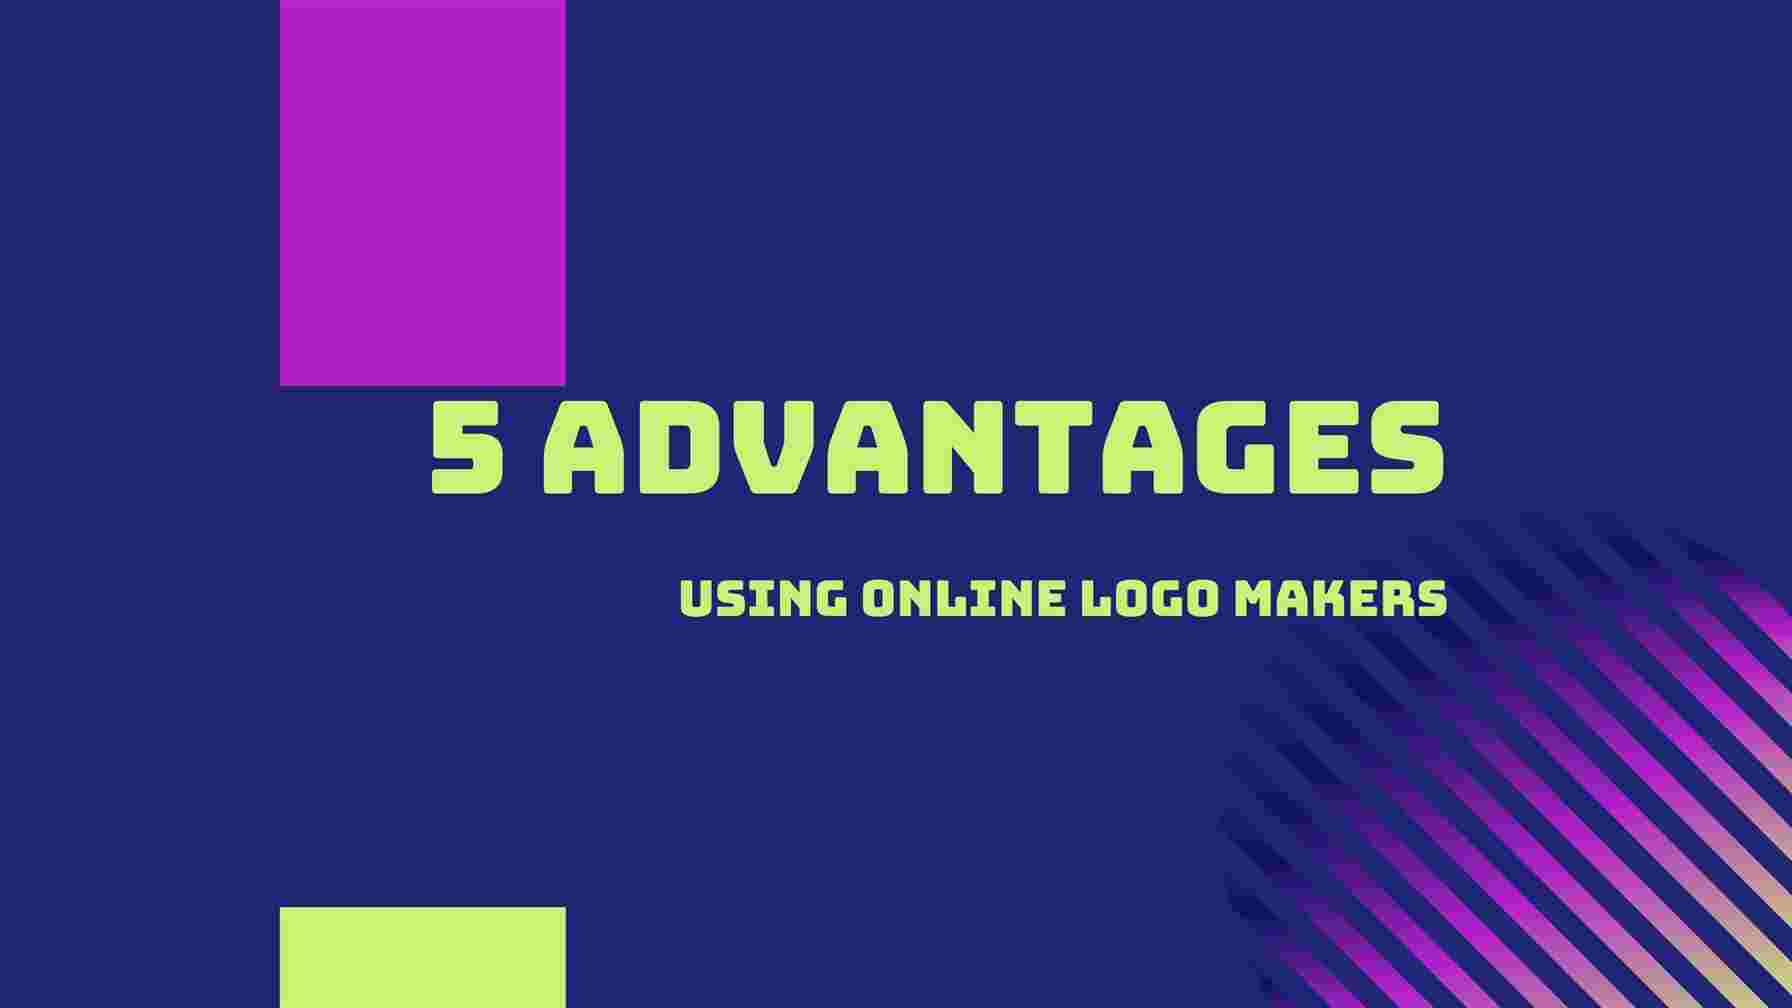 5 Advantages of Using Online Logo Makers for You